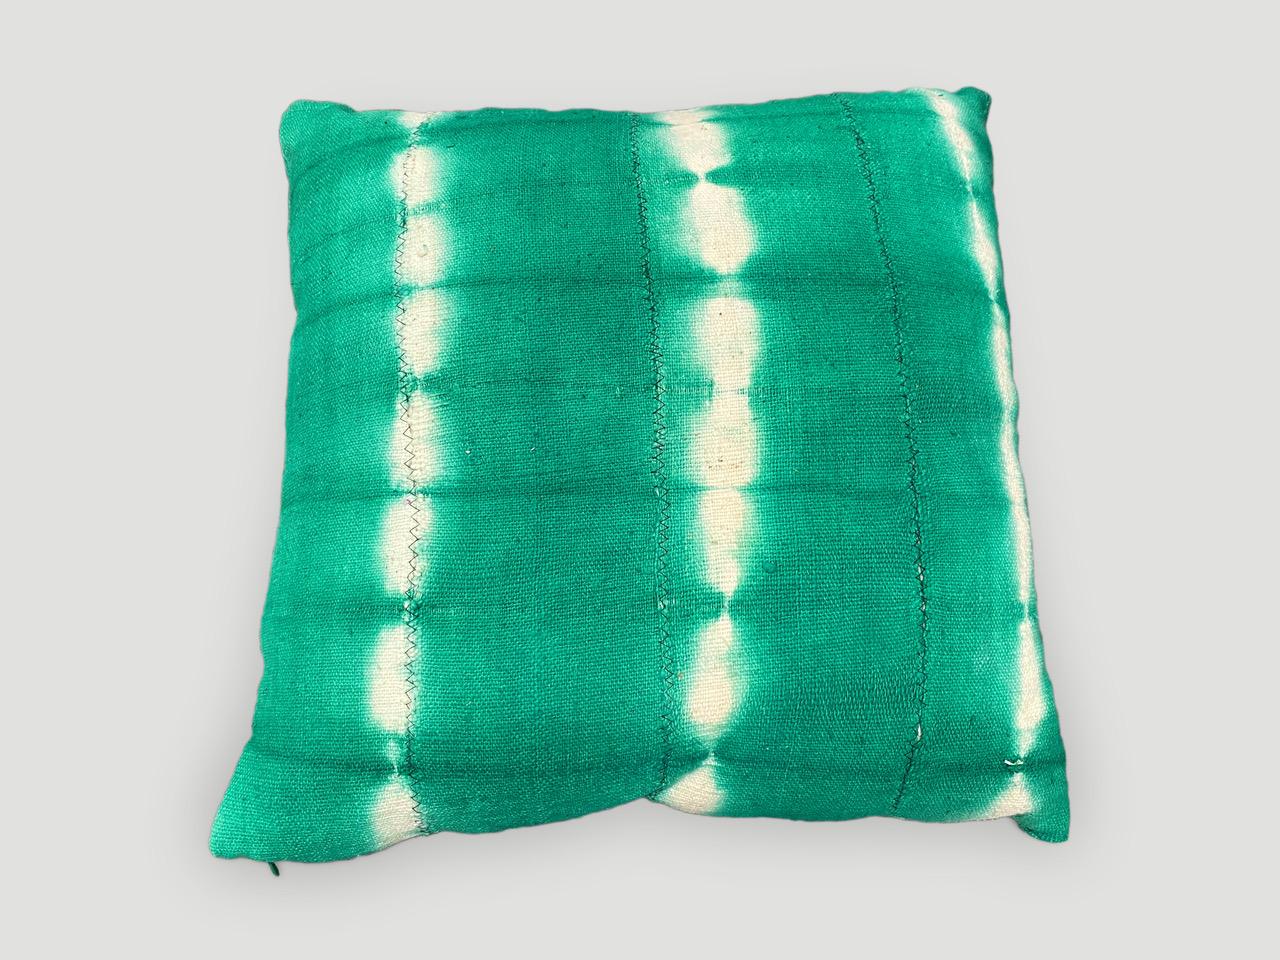 African Andrianna Shamaris Mali Pillow For Sale